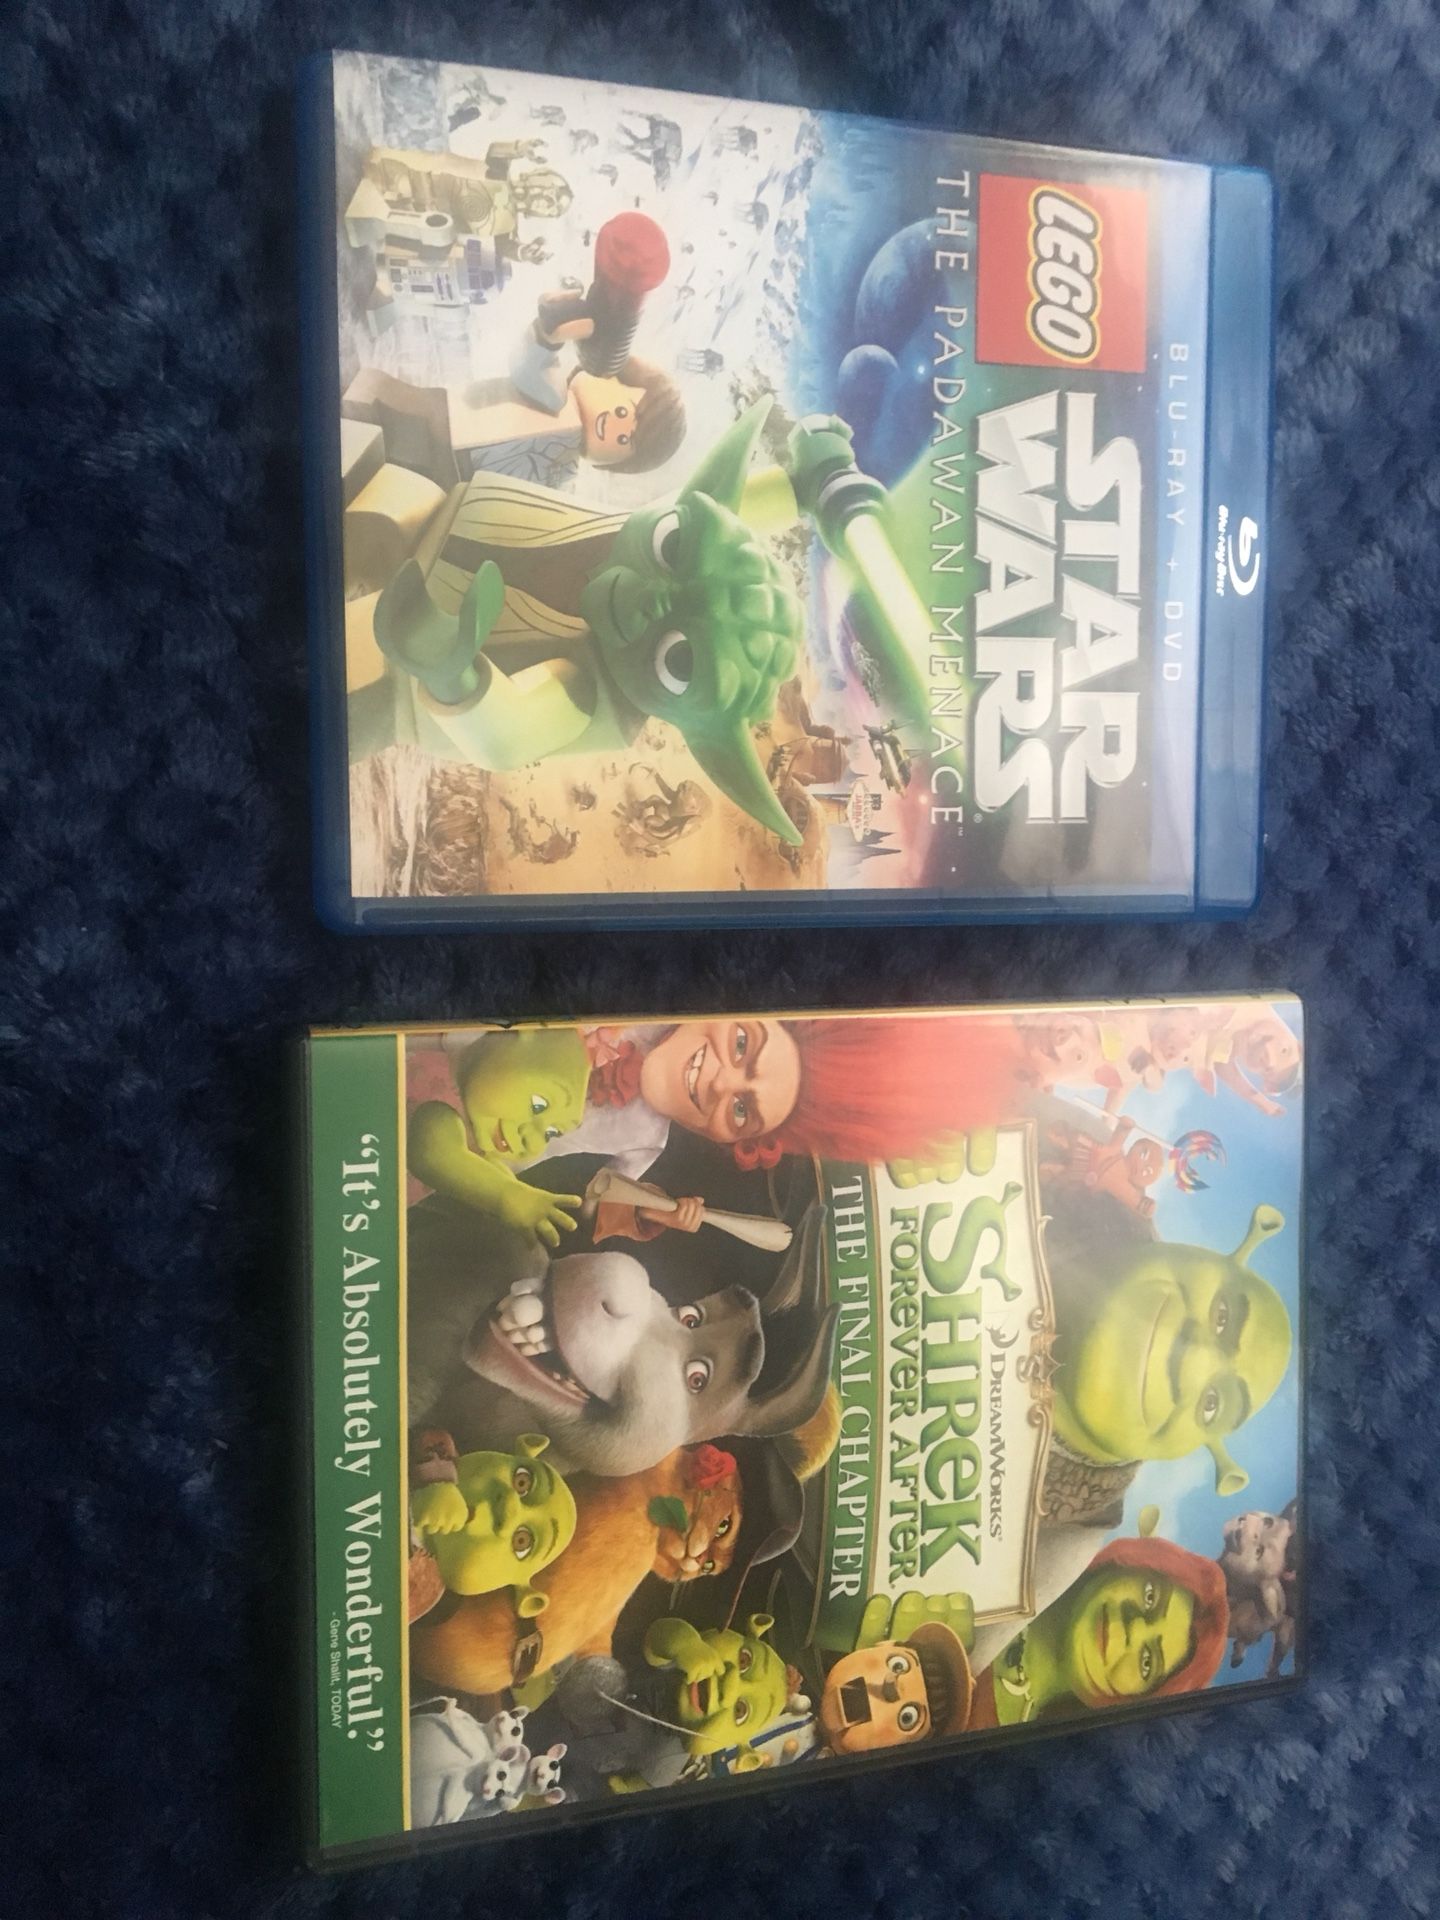 2 dvd and Blu-ray Disc movies